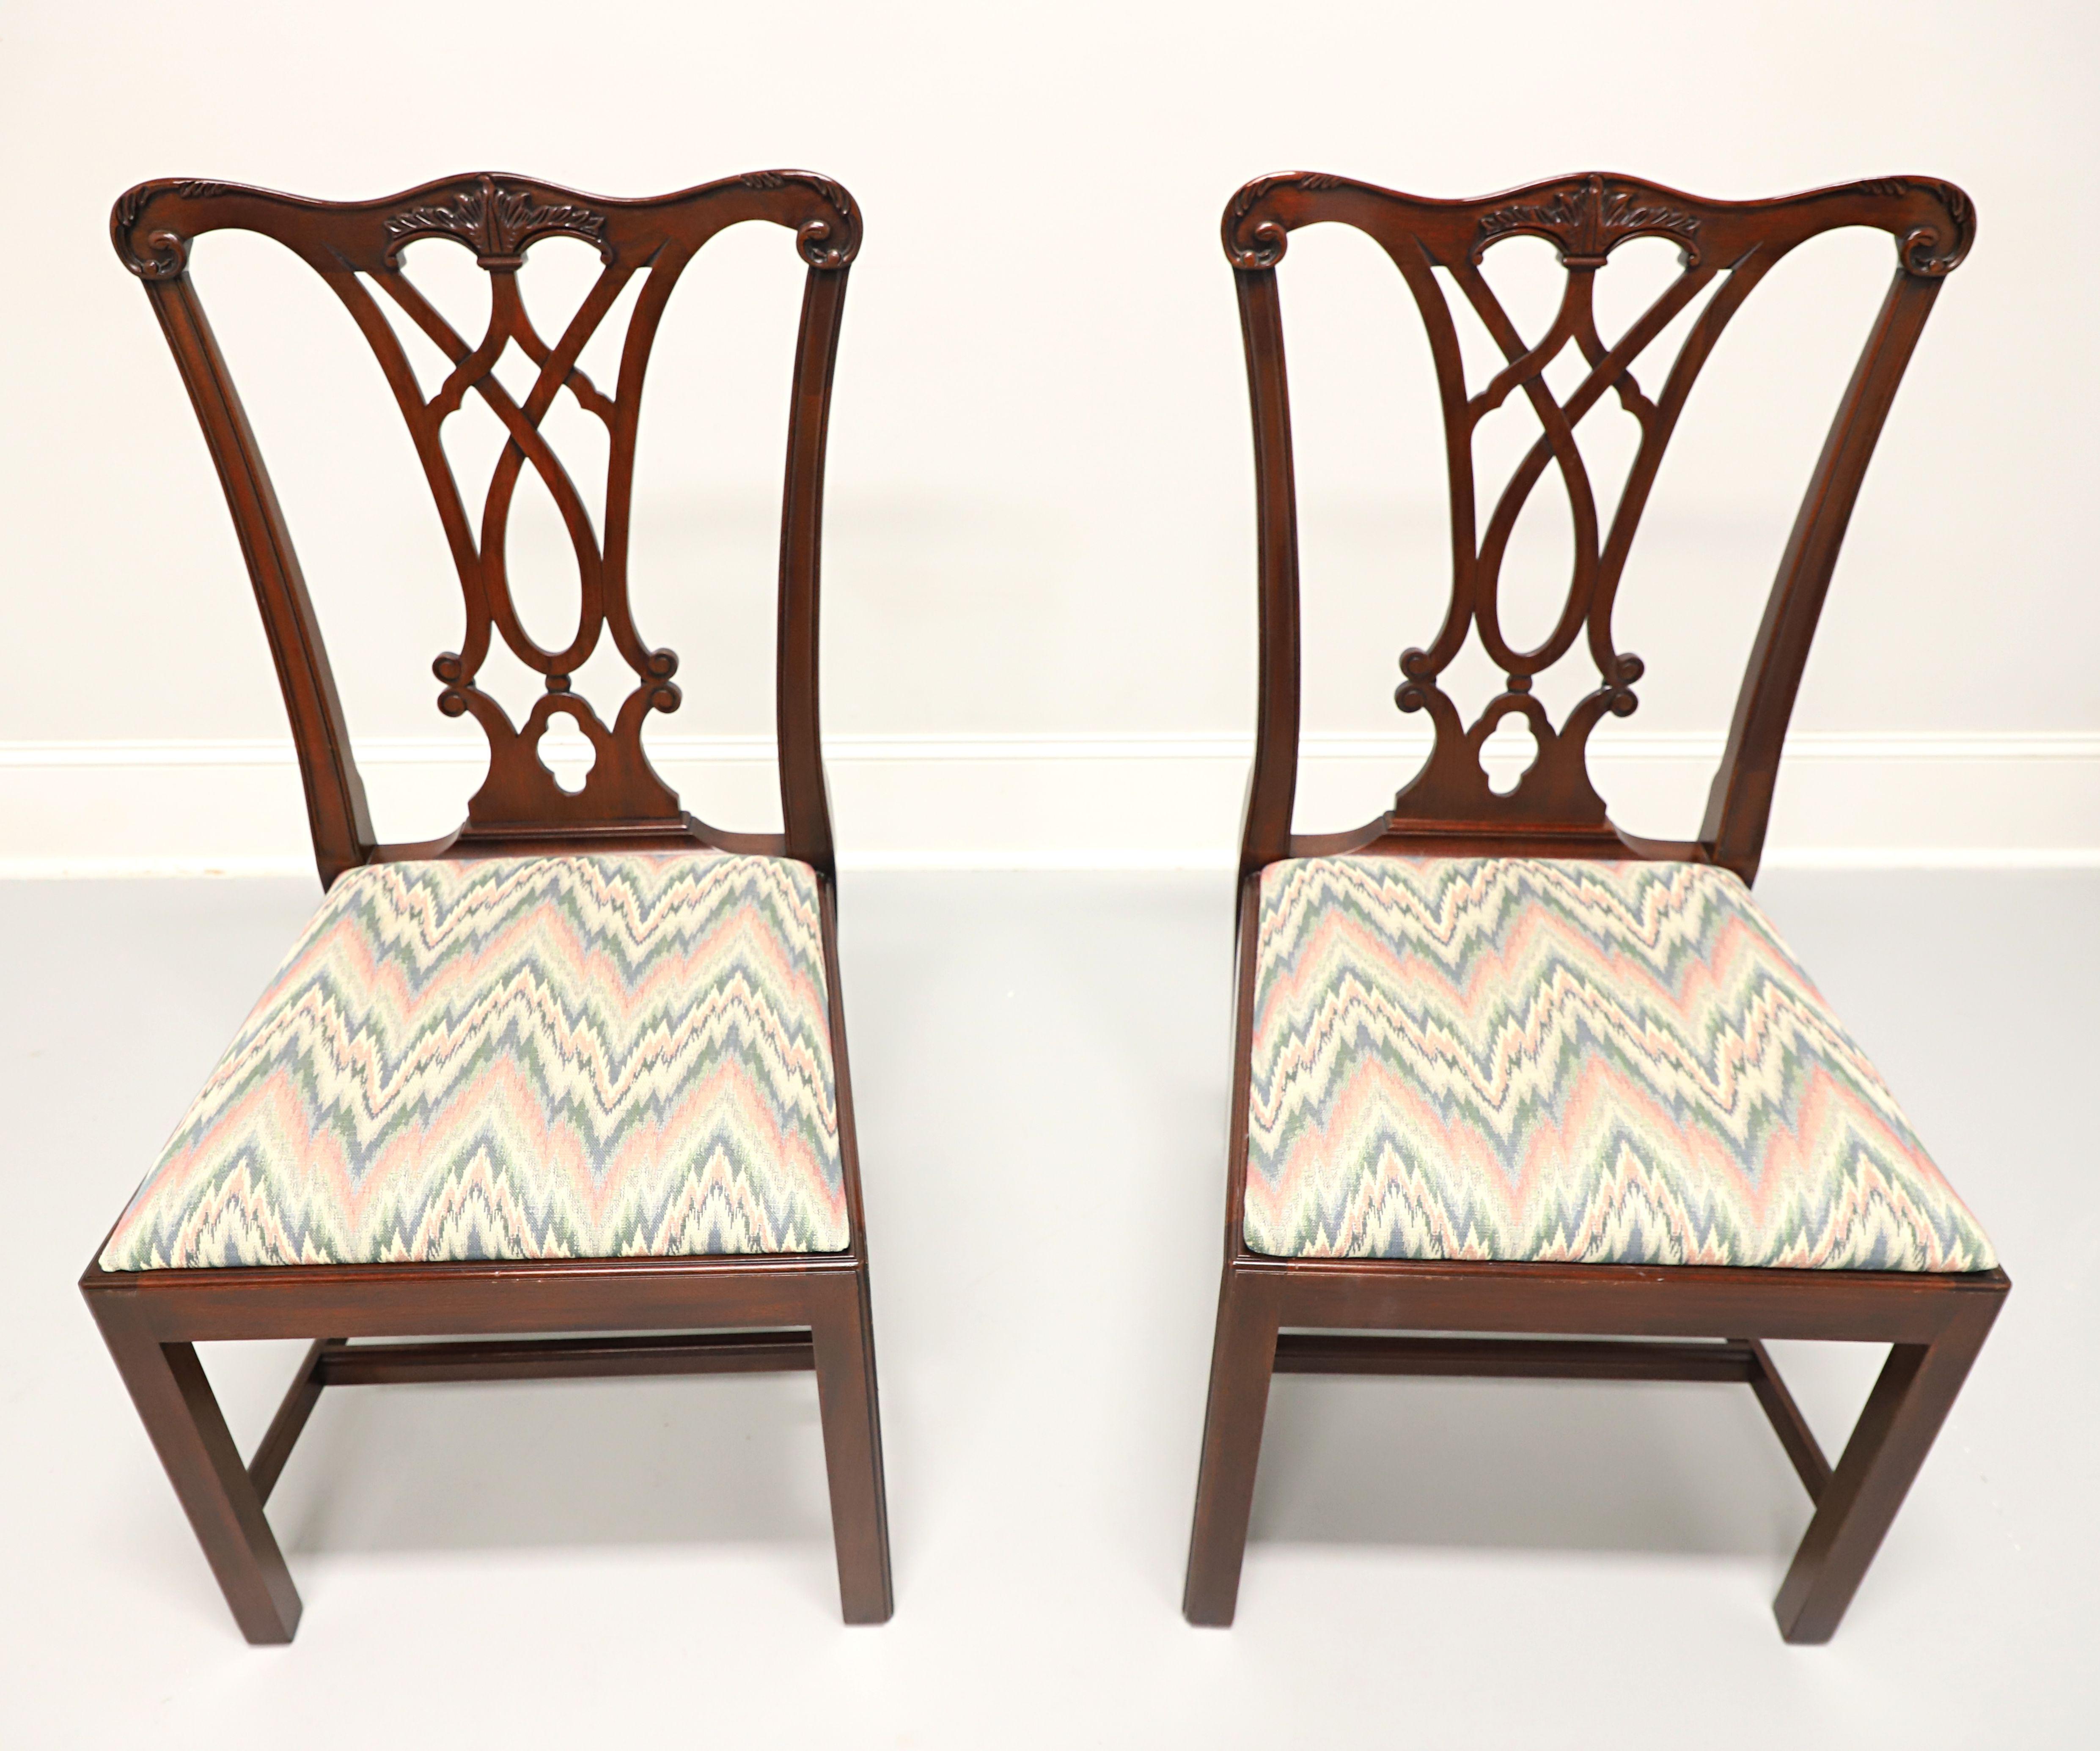 A pair of Chippendale style dining side chairs by Henkel Harris, of Winchester, Virginia, USA. Solid mahogany, carved crest rail & backrest, multi-color flame stitch pattern fabric upholstered seat, straight legs and stretchers. Made in 1992.